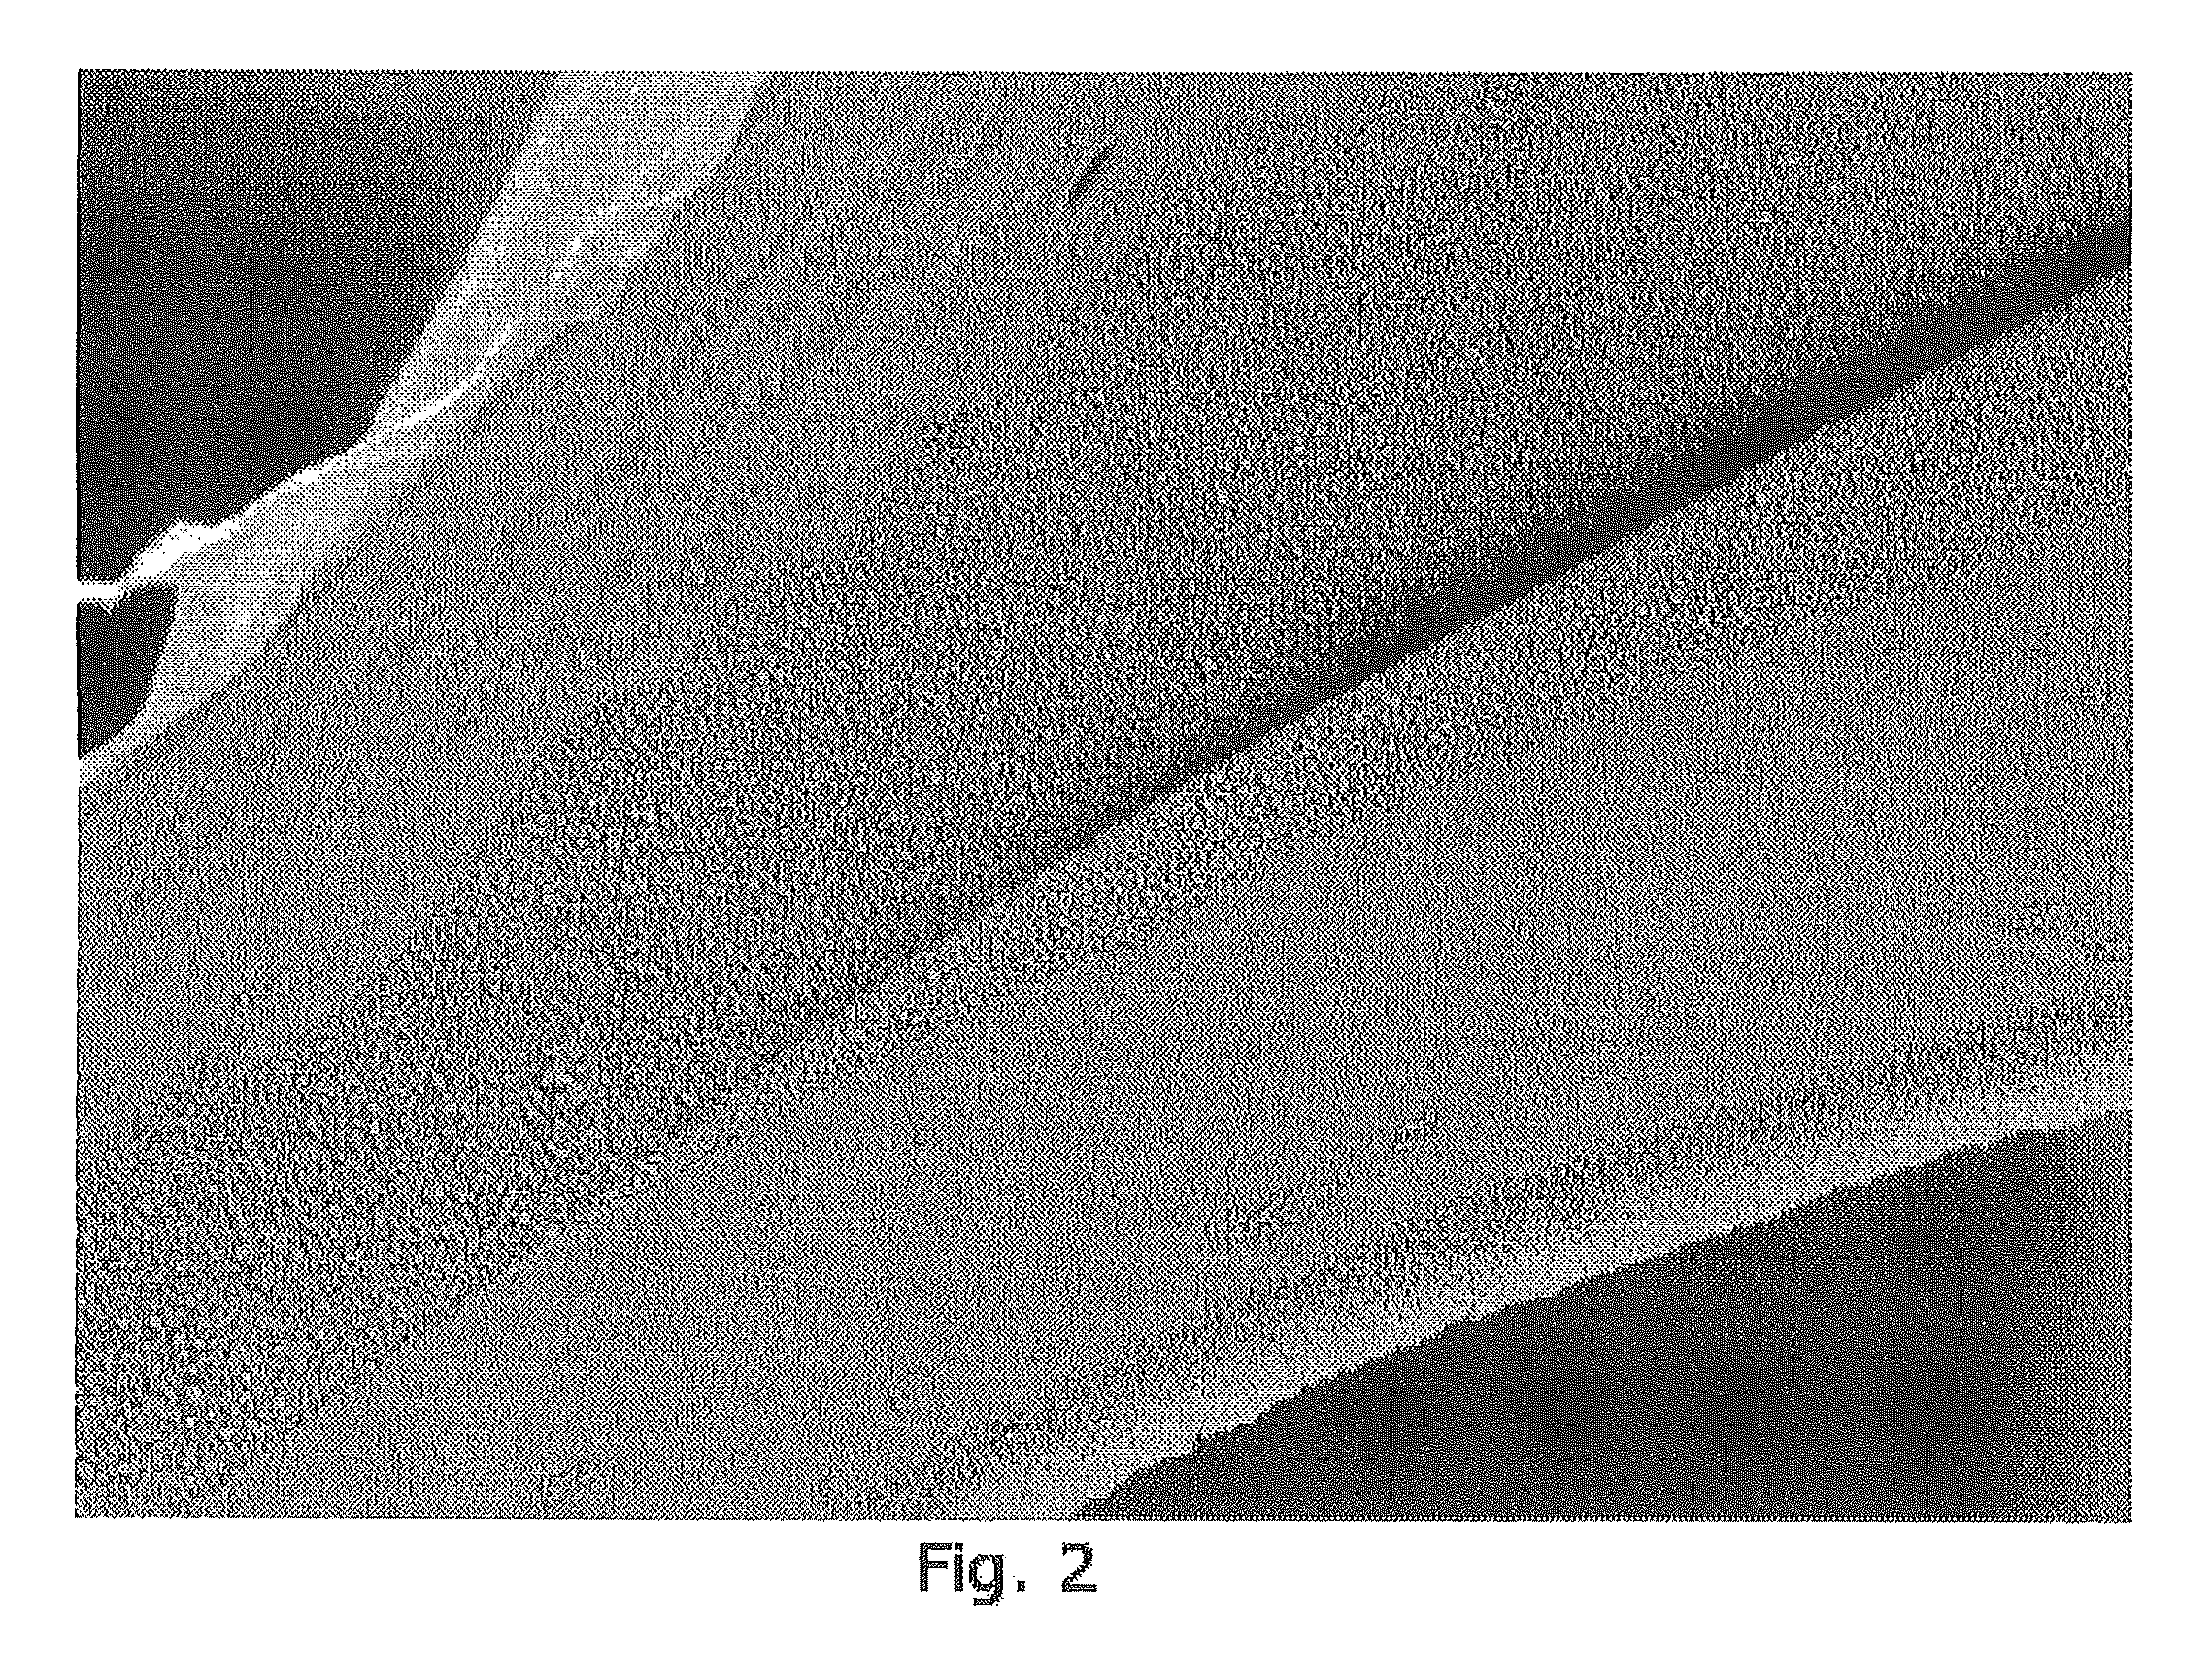 Method for the production of abrasive foams